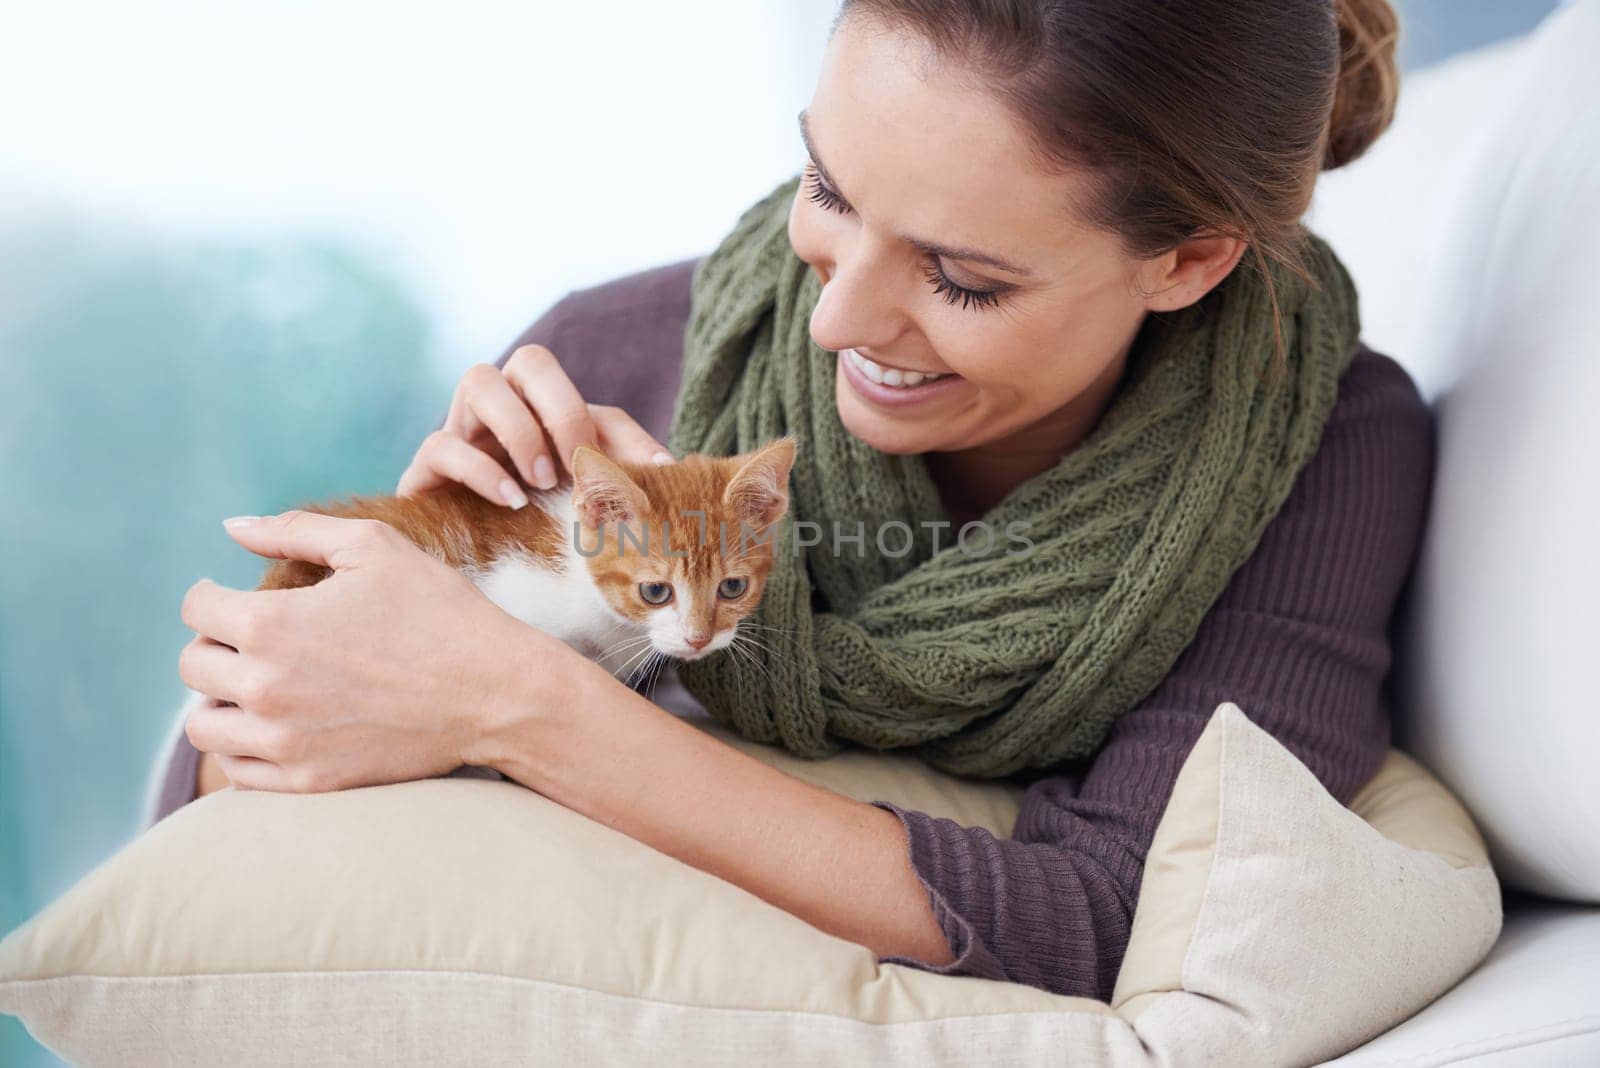 Happy, sofa and woman with kitten in home for bonding, friendship and relax together in house. Animal care, pets and person with adorable, cute and young cat on couch for playing, affection and love by YuriArcurs